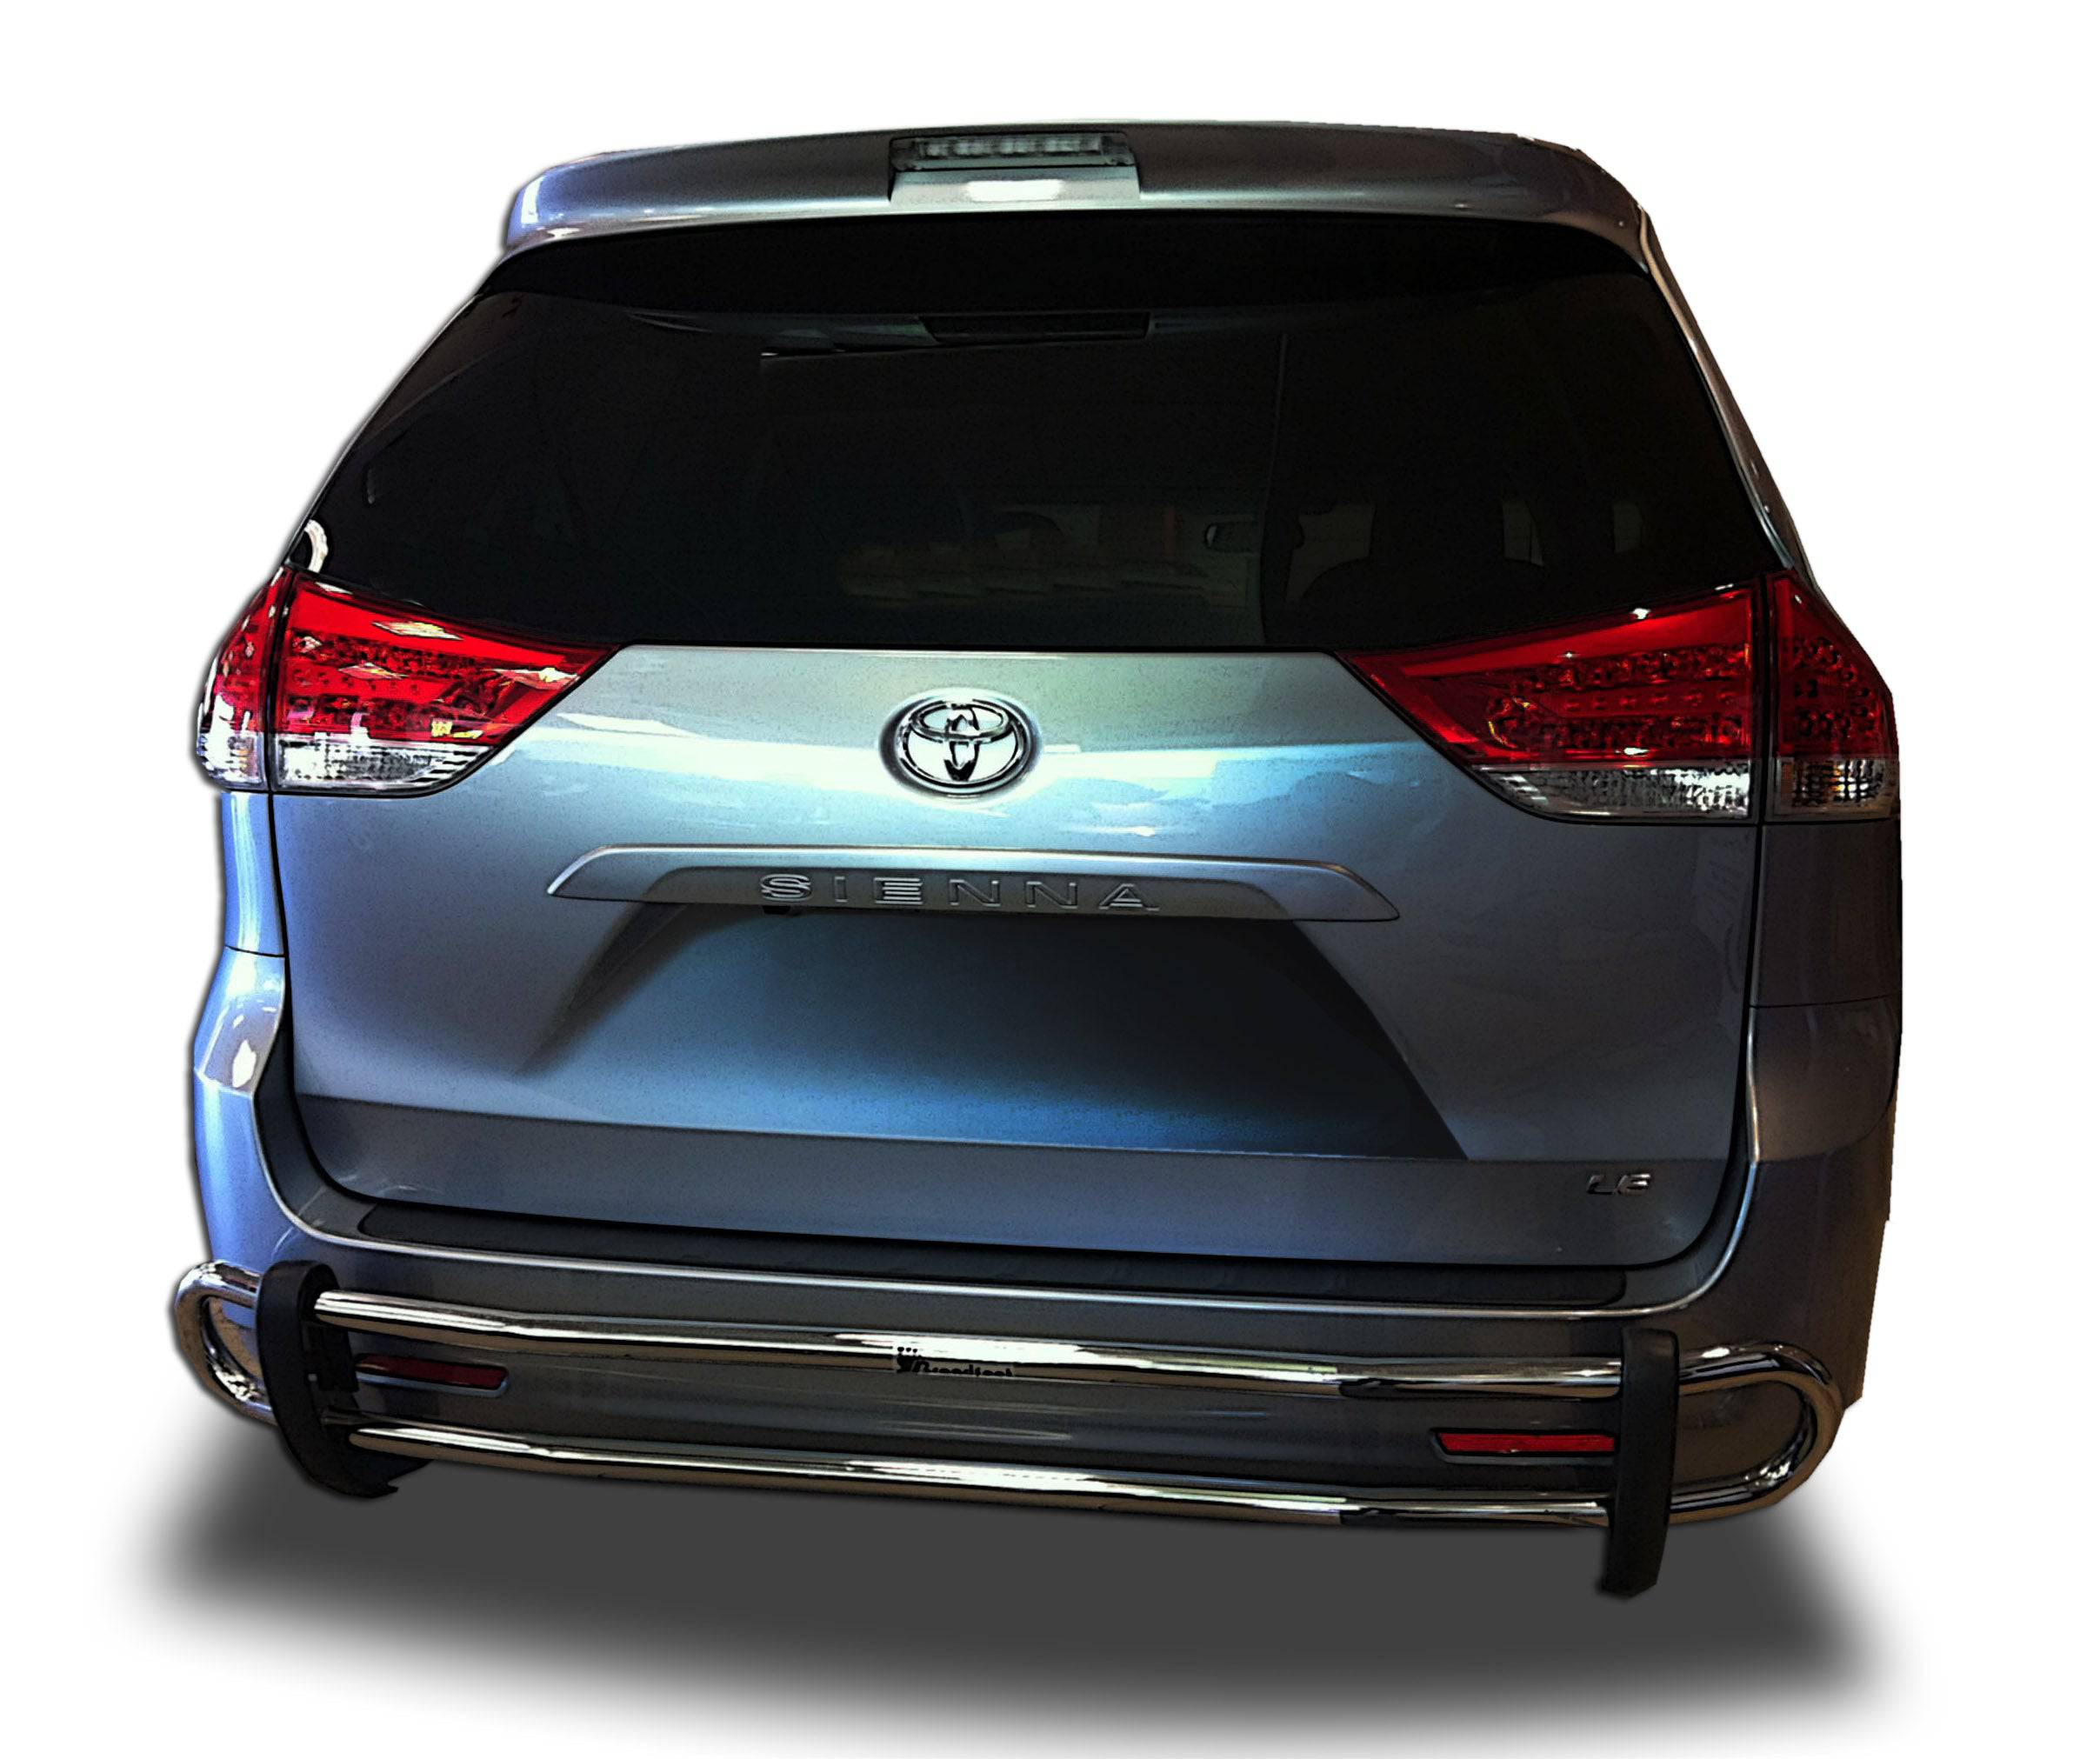 Broadfeet Toyota Sienna Rear Double Pipe Bumper Guard Parking Protector Exterior Accessories Parts